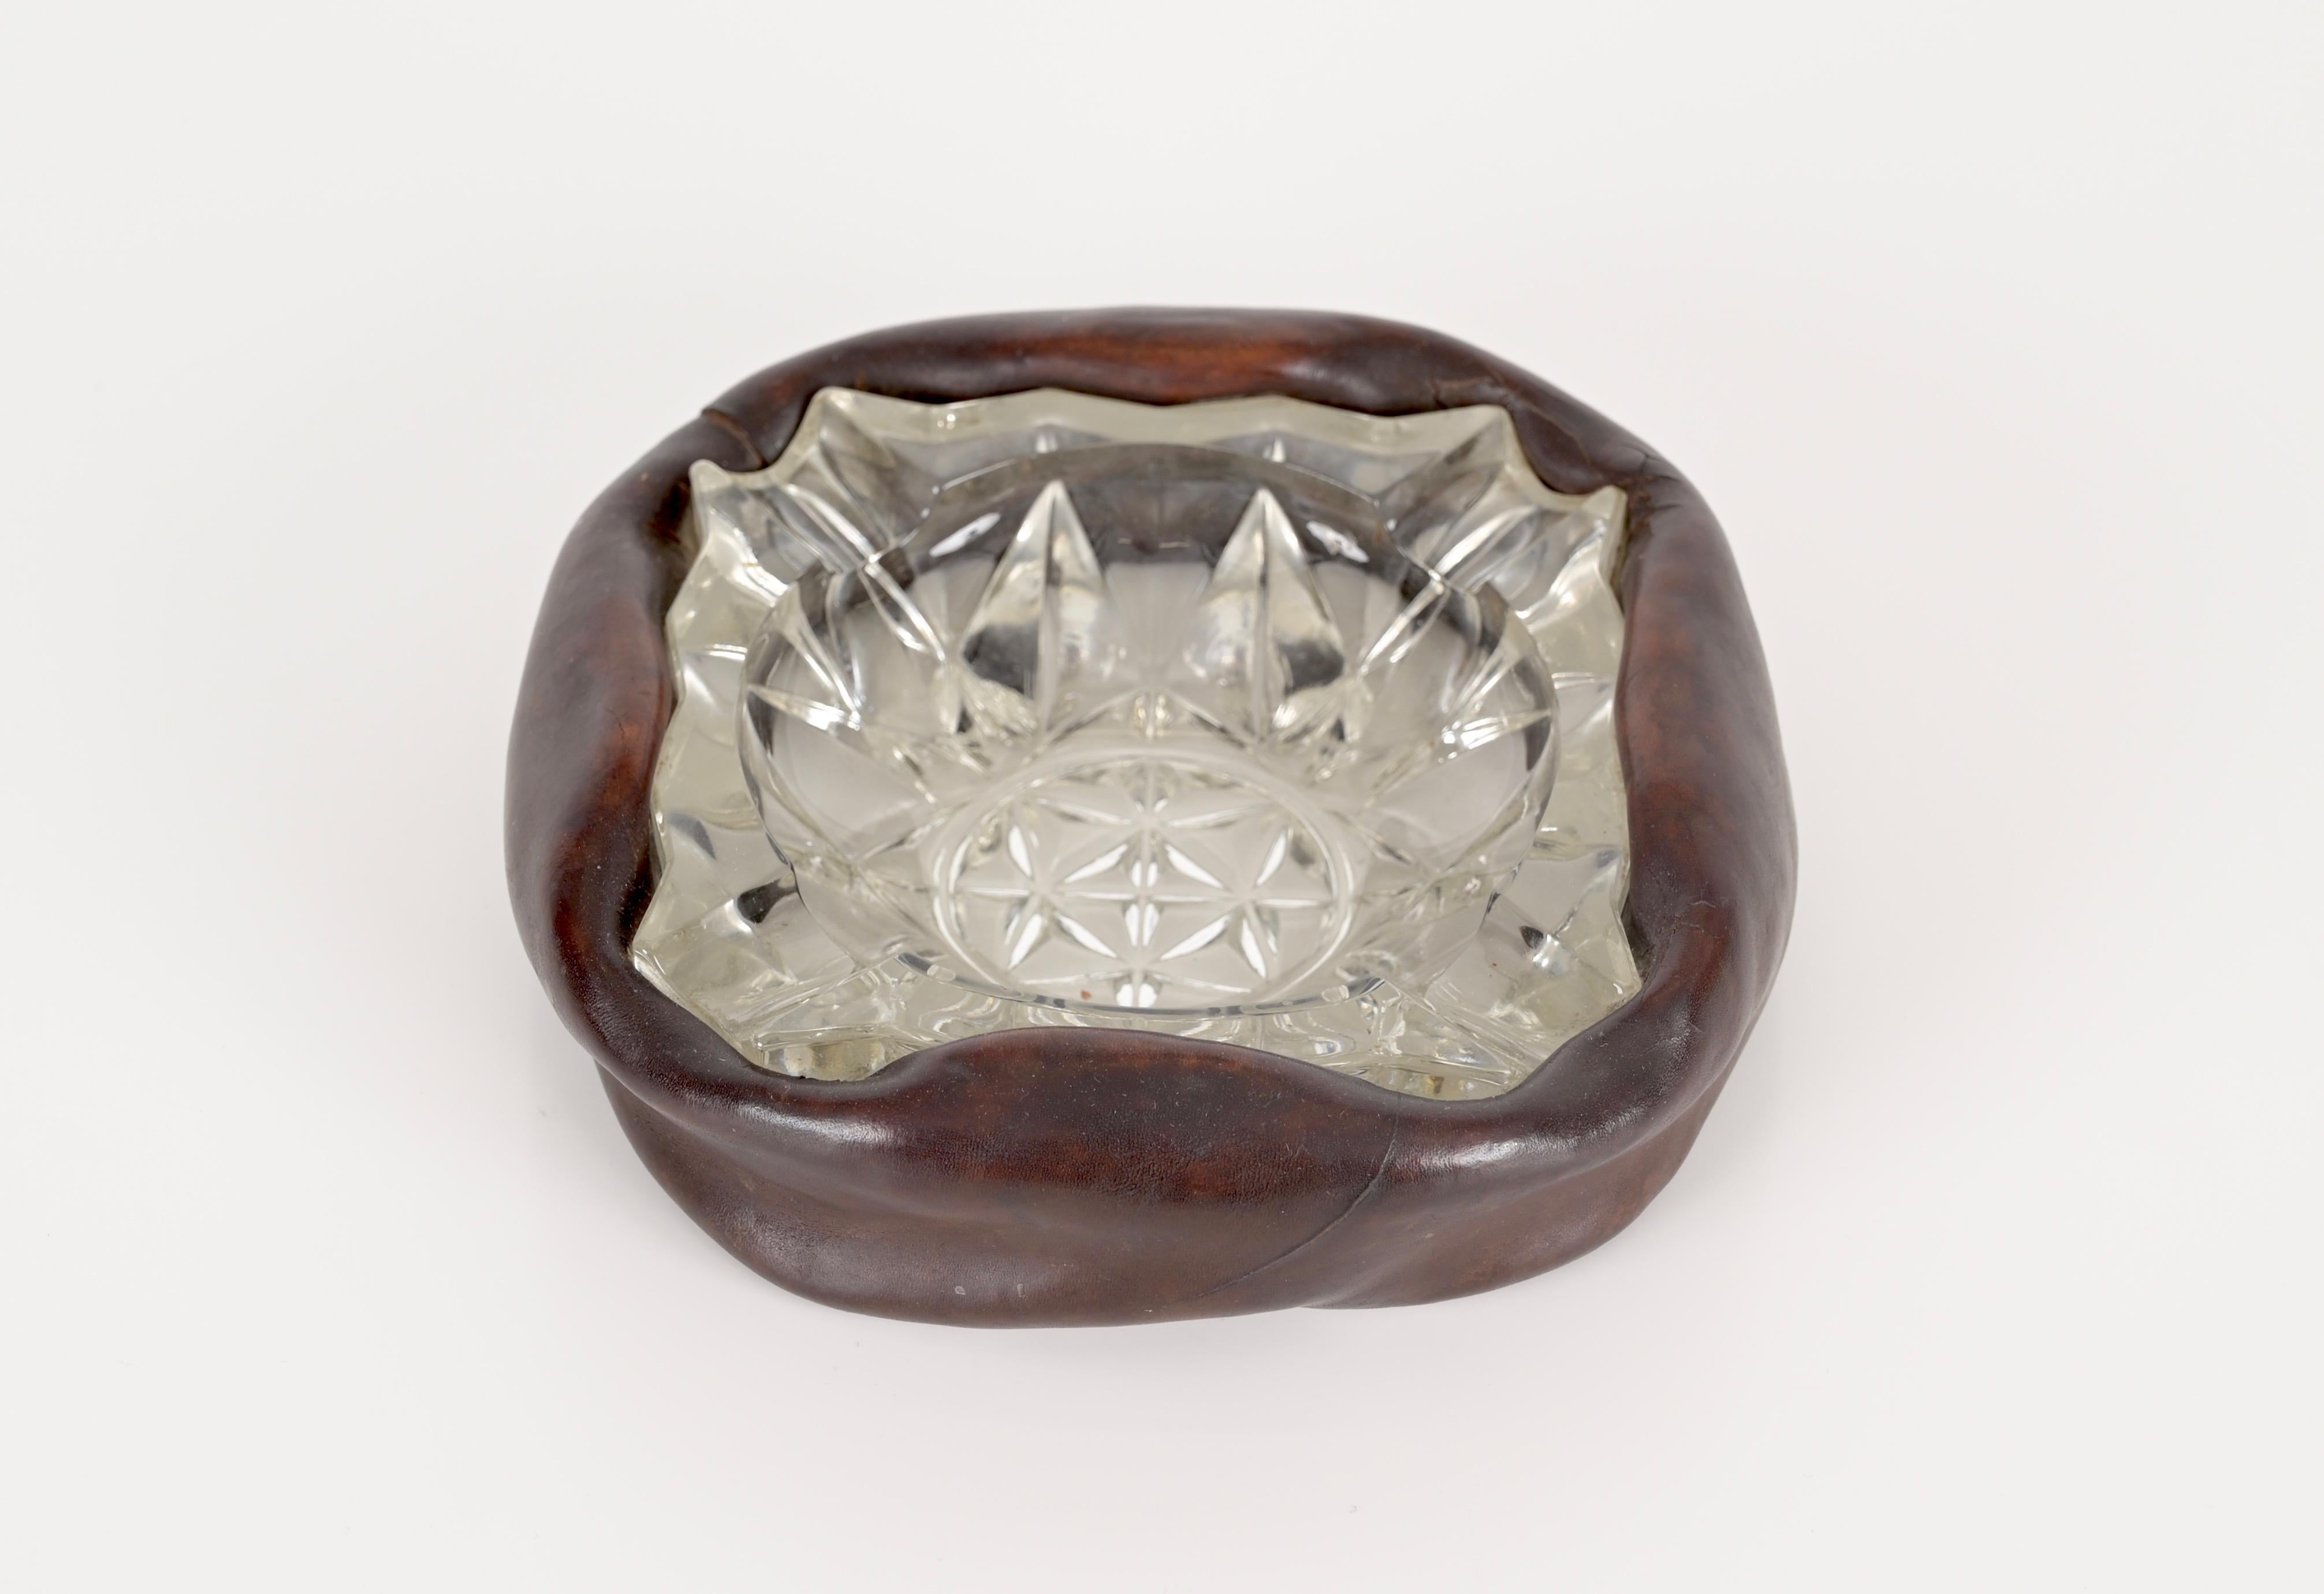 Superb ashtray with a bent leather frame and crystal cut glass. This fantastic piece is attributed to Jacques Adnet and was produced in France during the 1960s.

This charming ashtray is made in a fantastic cut glass which is in amazing conditions